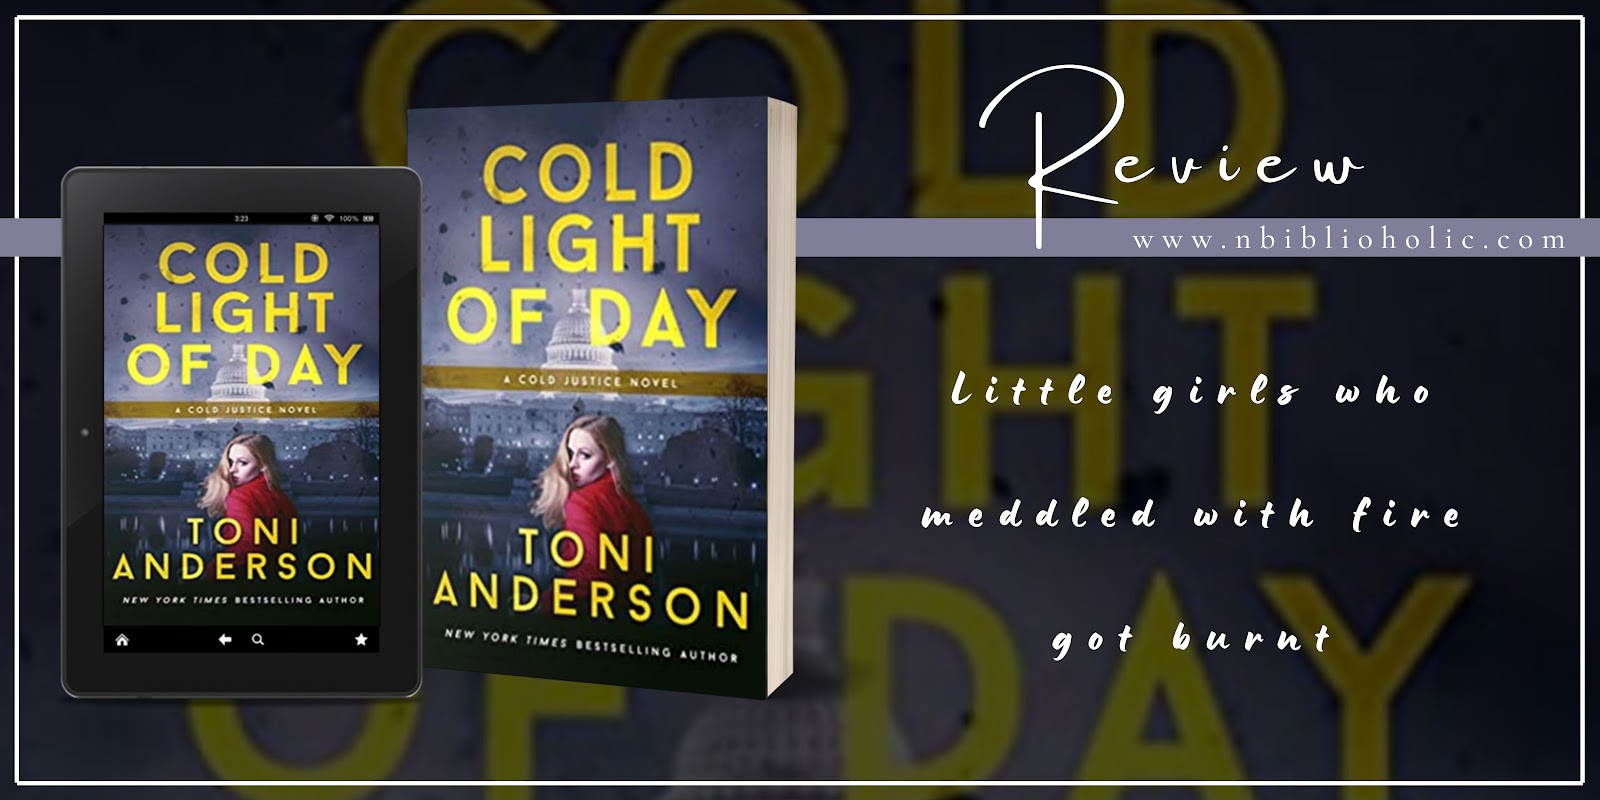 Cold Light of Day by Toni Anderson